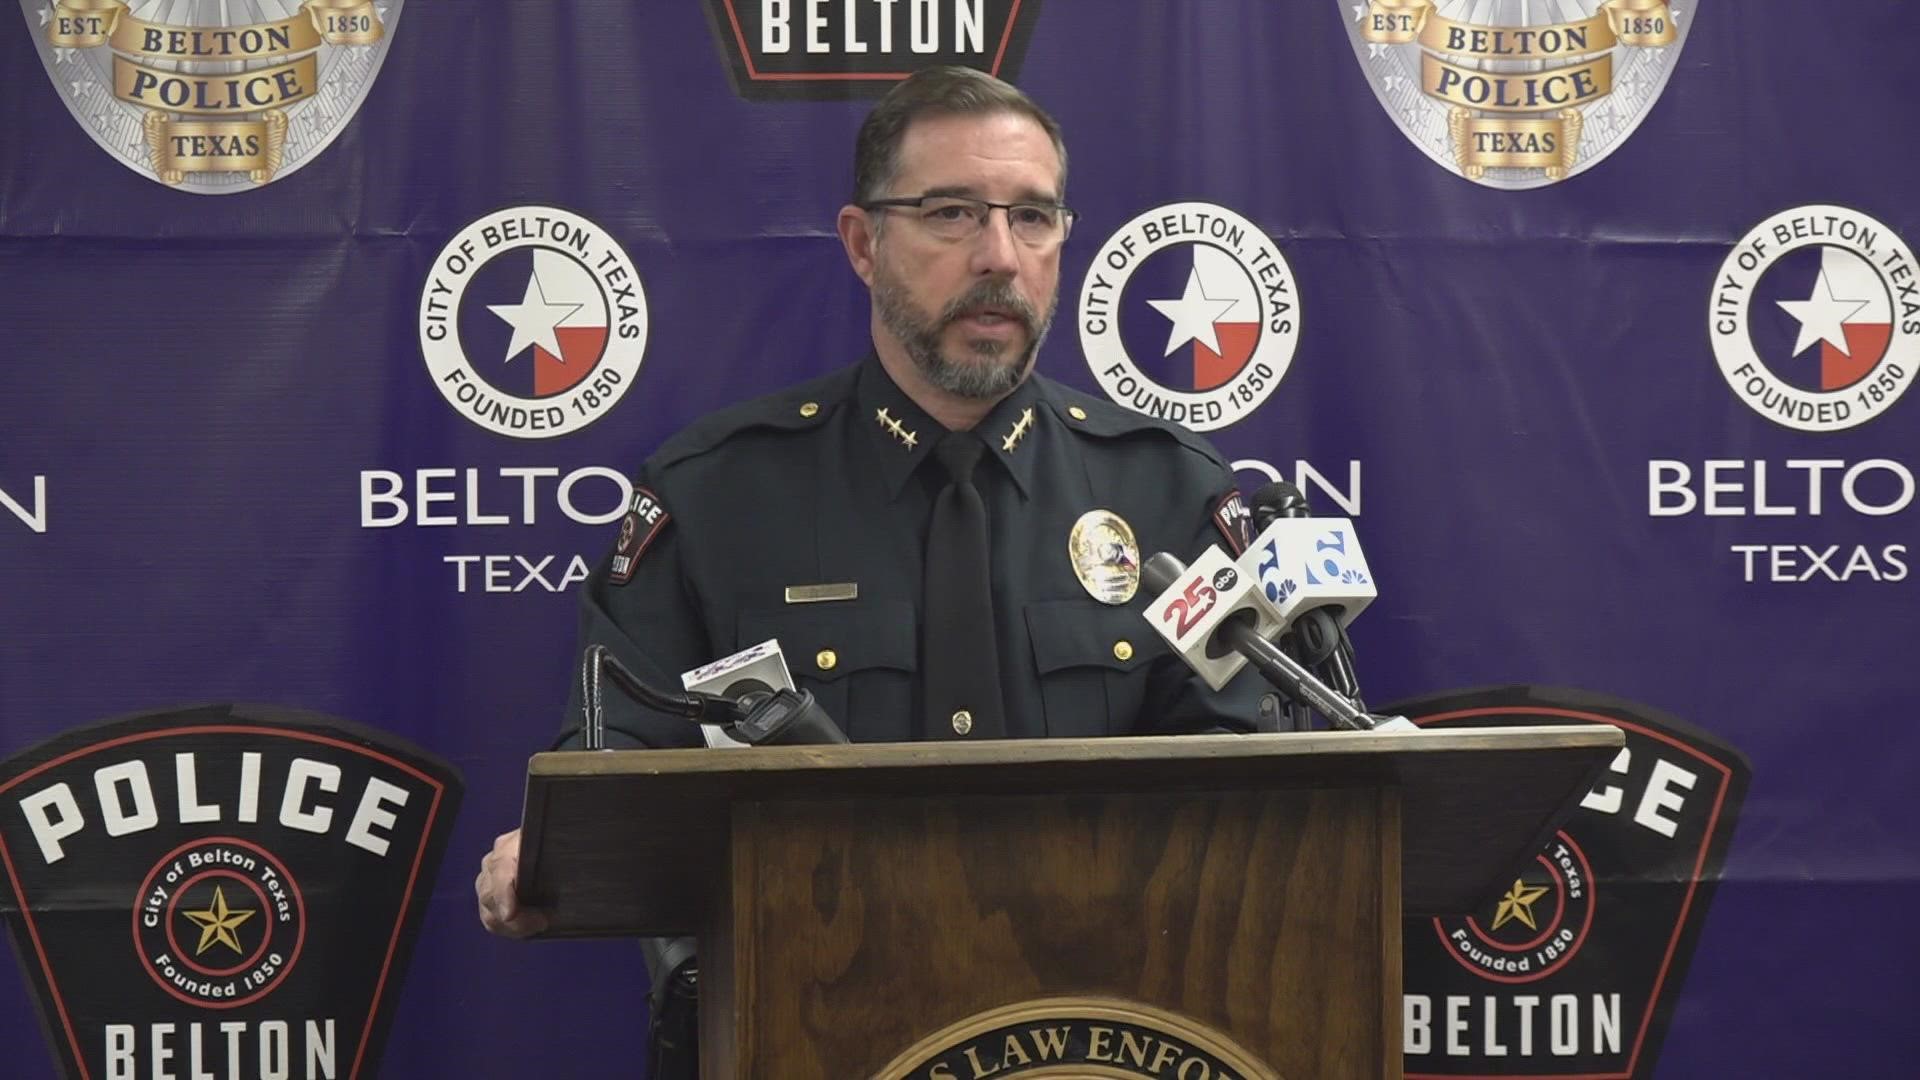 The Belton Police Department held a news conference Wednesday morning to discuss new evidence in the 2014 murder case.